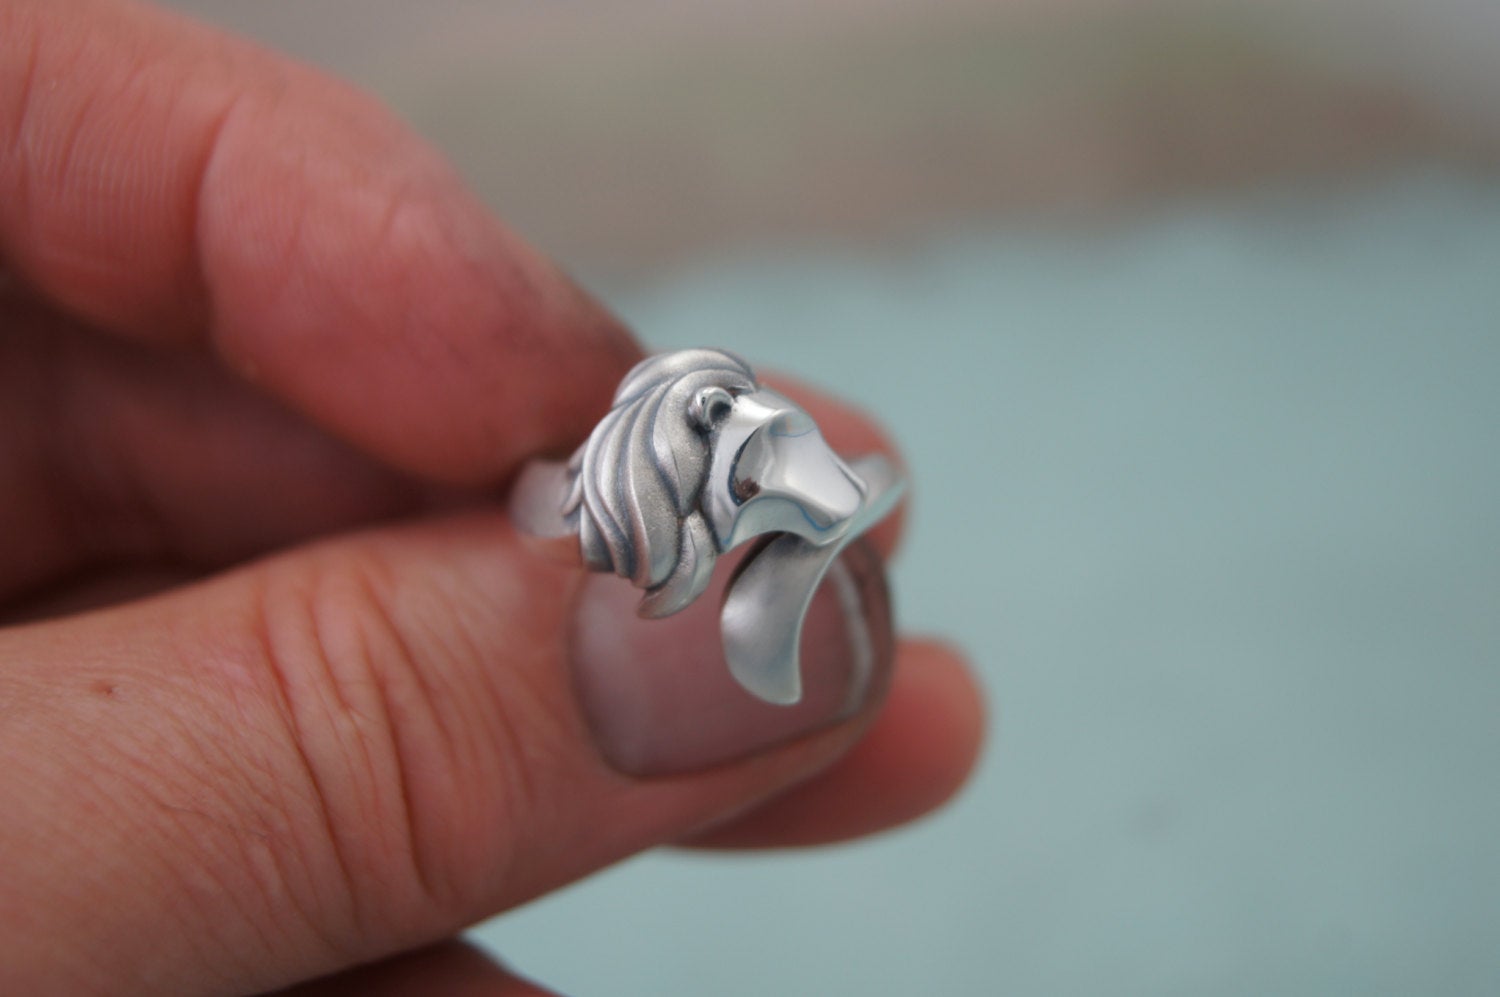 sterling silver lion ring